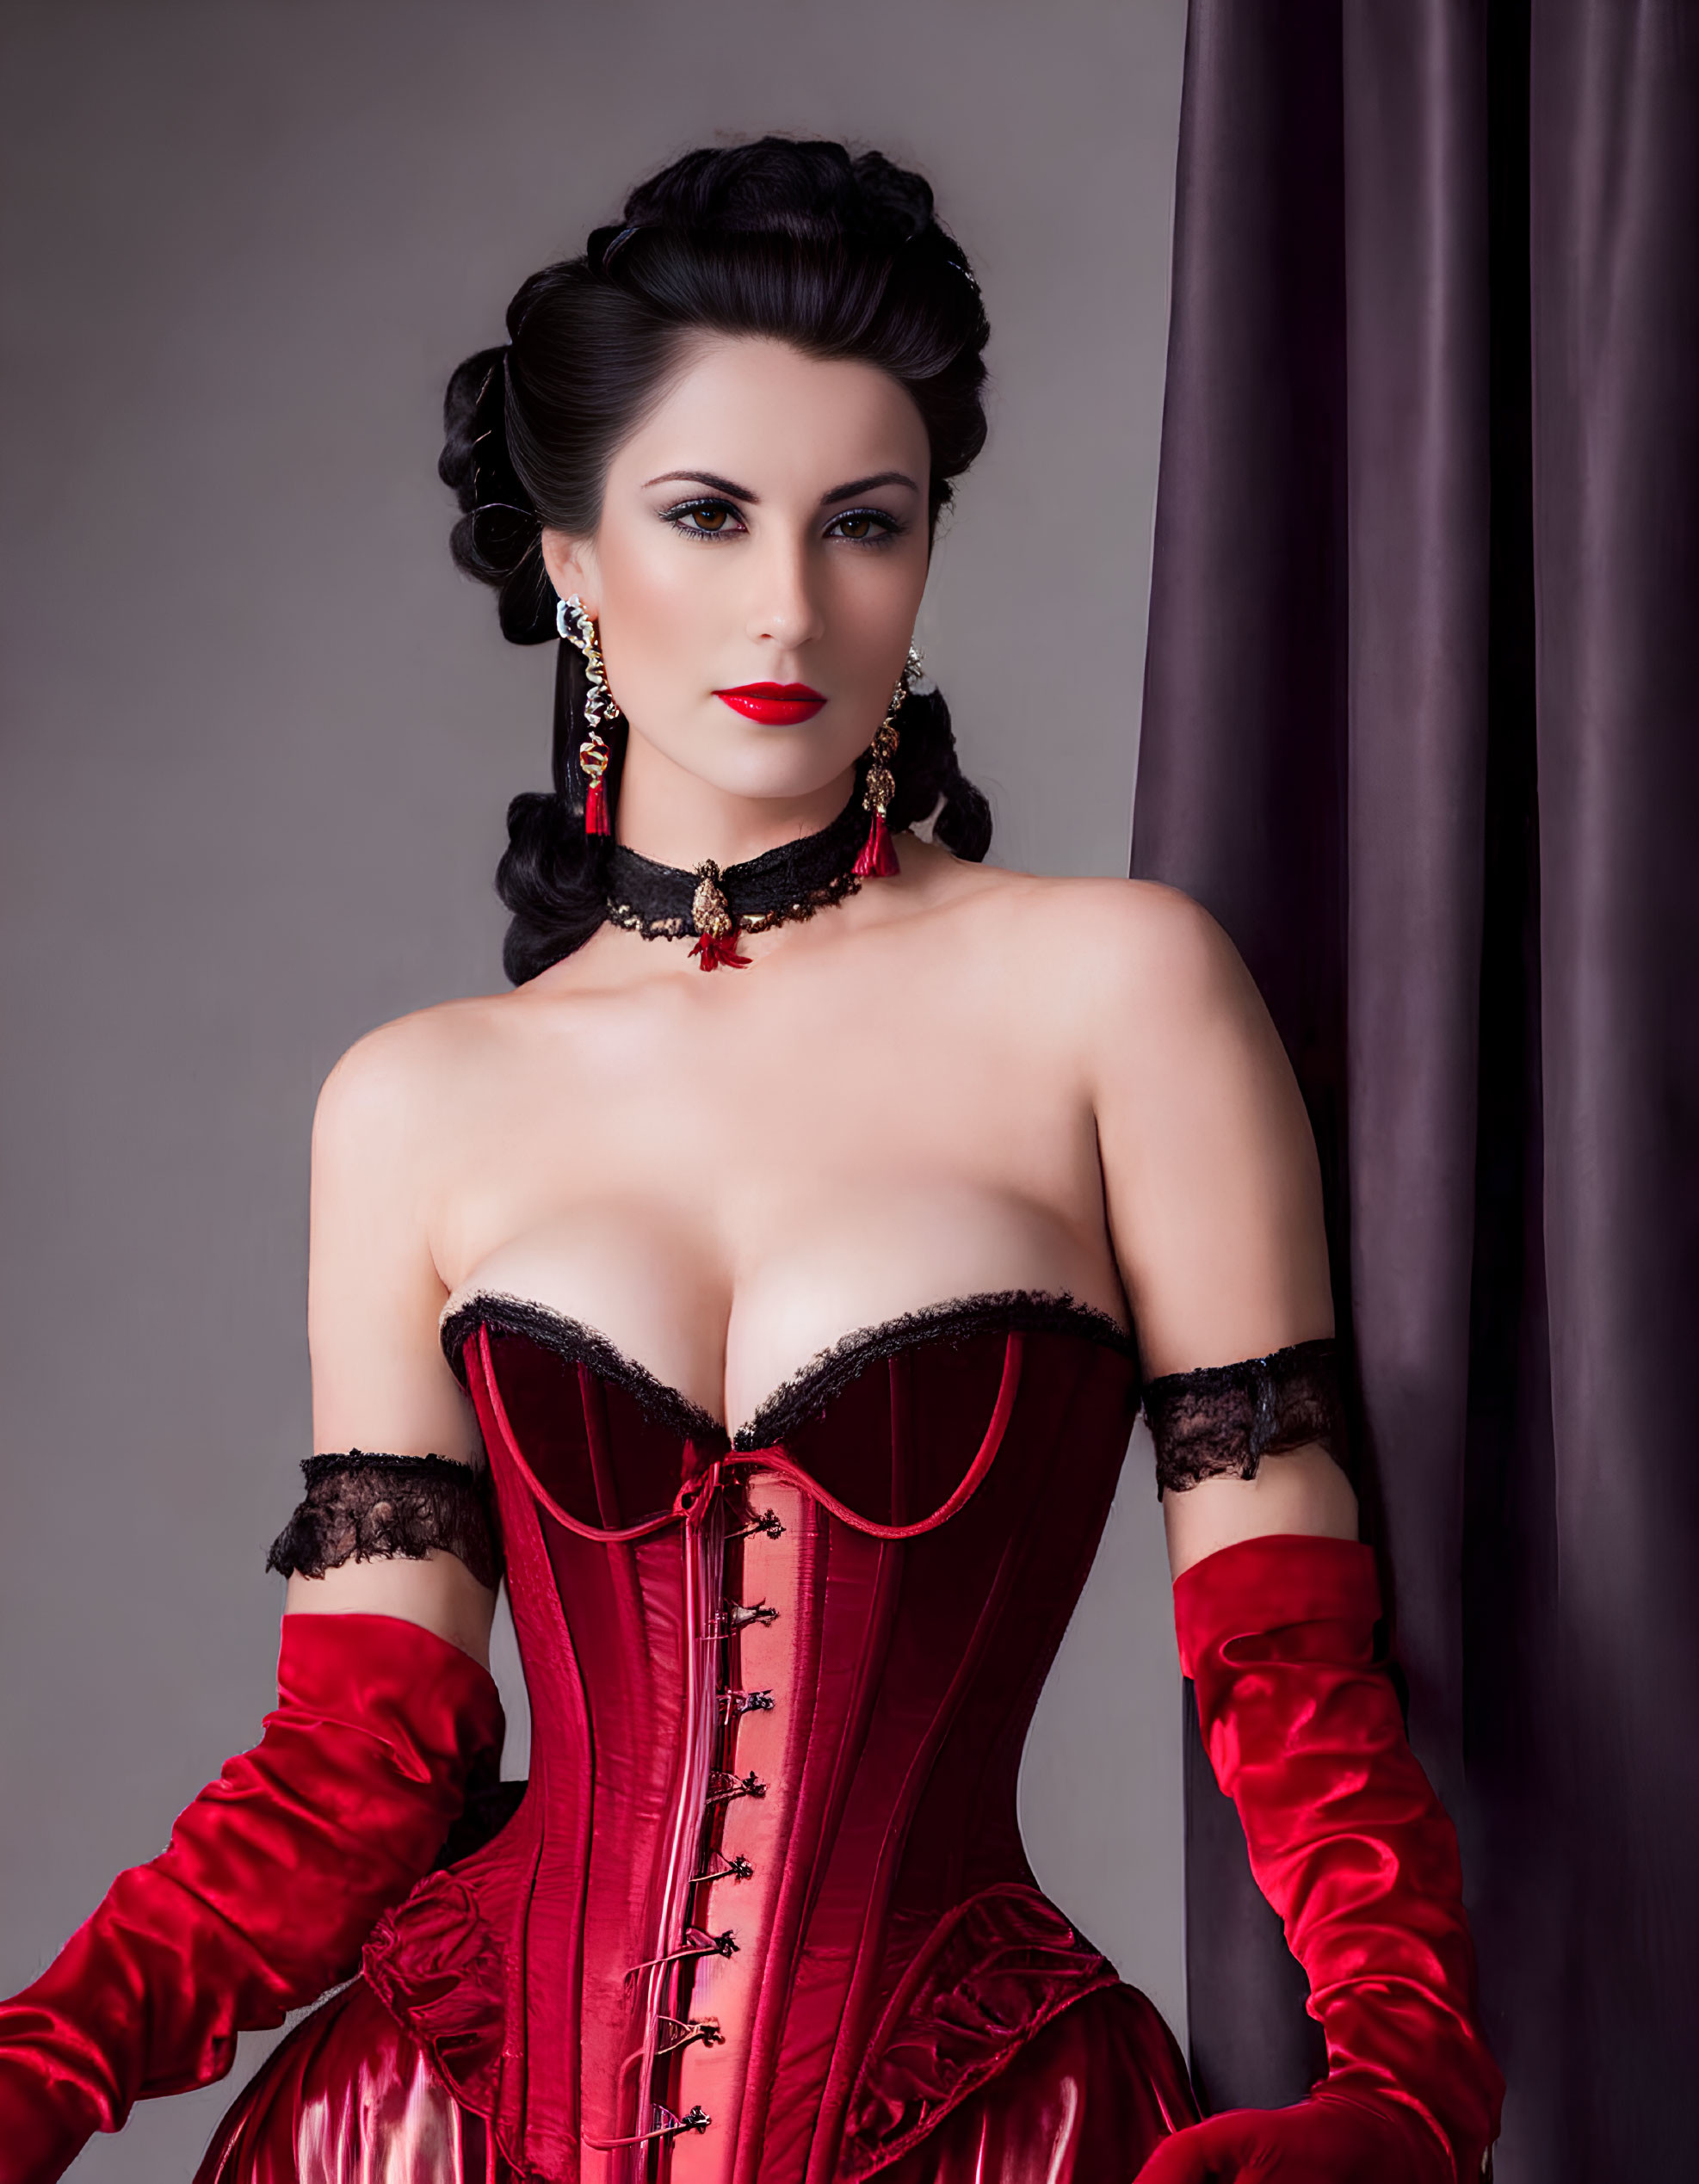 Dark-Haired Person in Vintage Style Red Corset and Satin Gloves